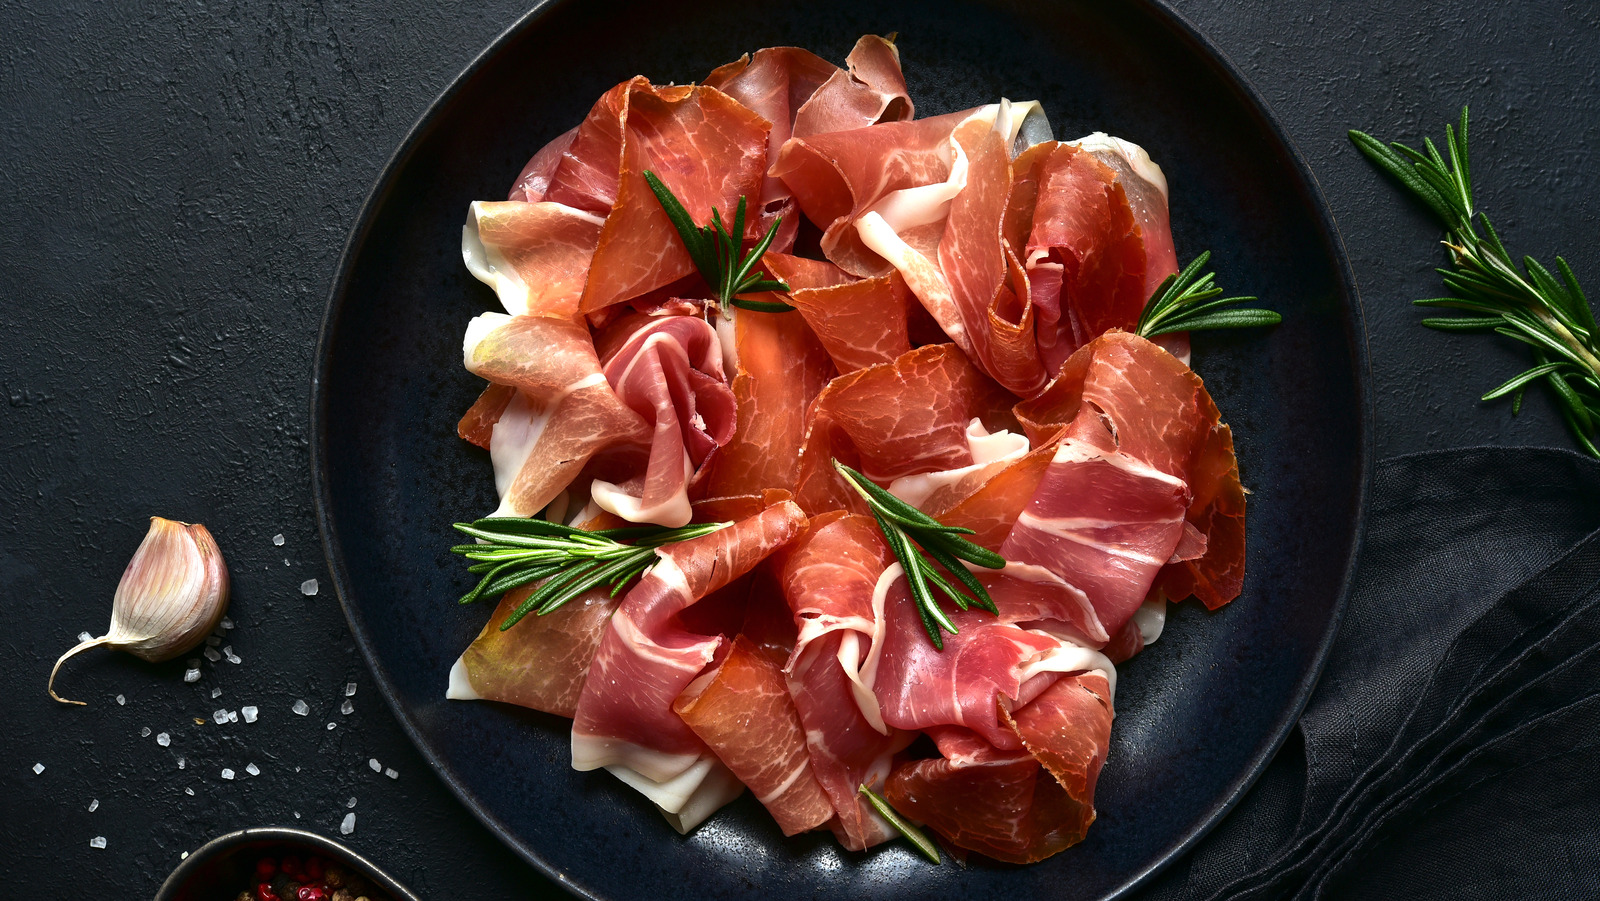 https://www.tastingtable.com/img/gallery/the-truth-about-prosciutto/l-intro-1660675372.jpg